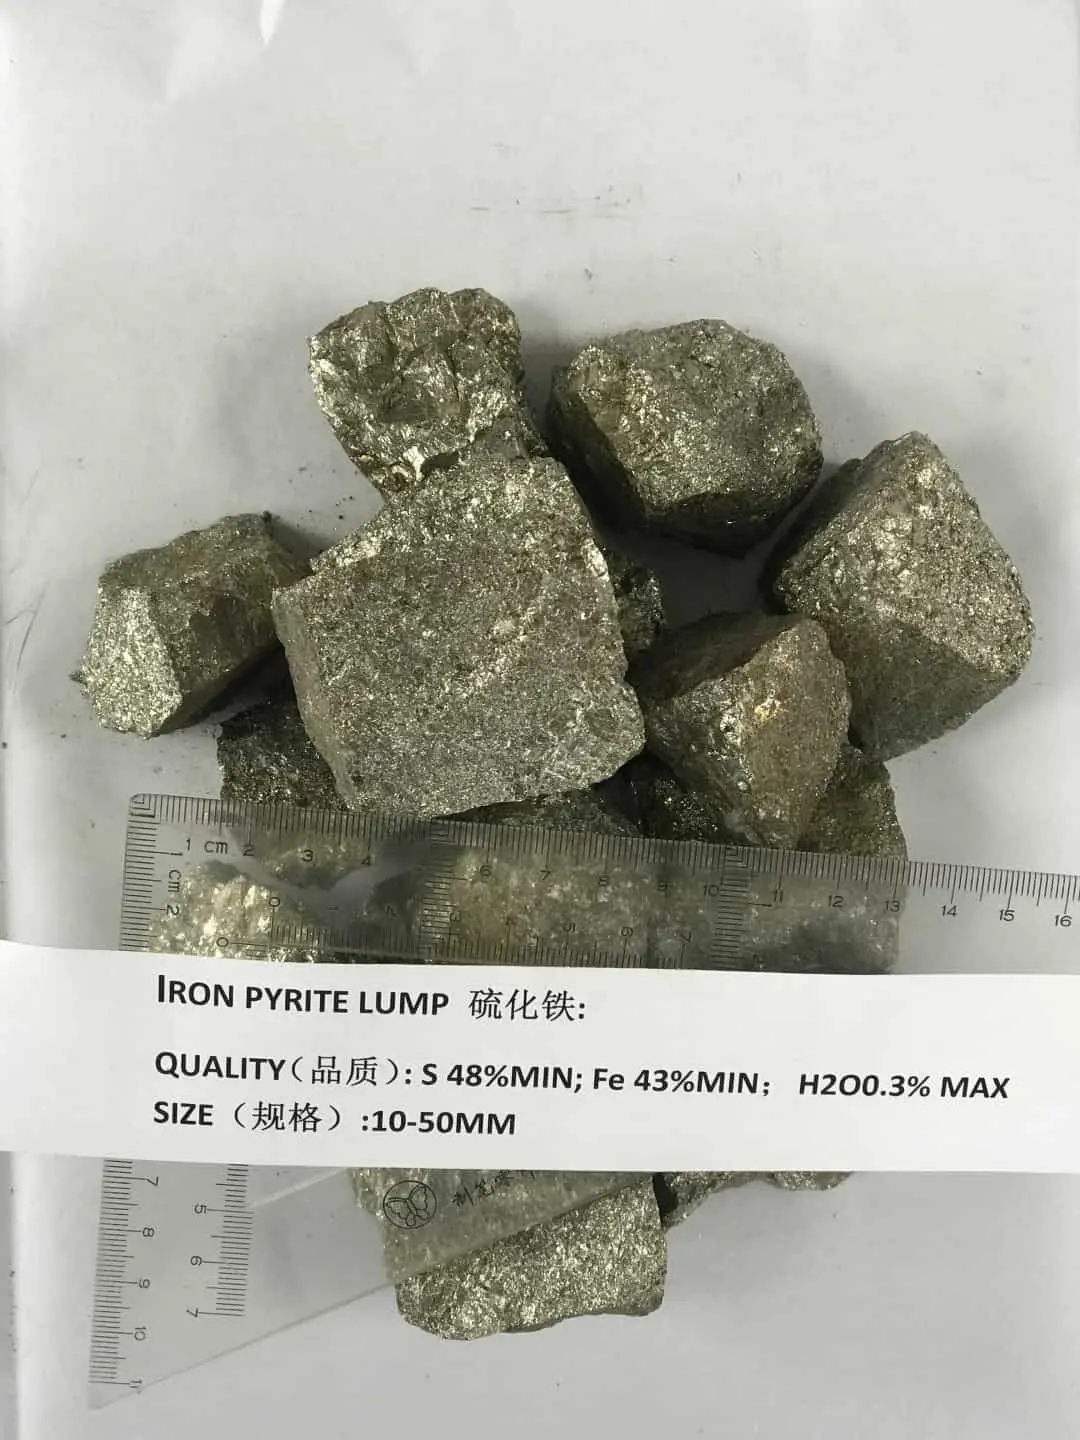 Producer of Pyrite Nugget with 44% Iron Concentration